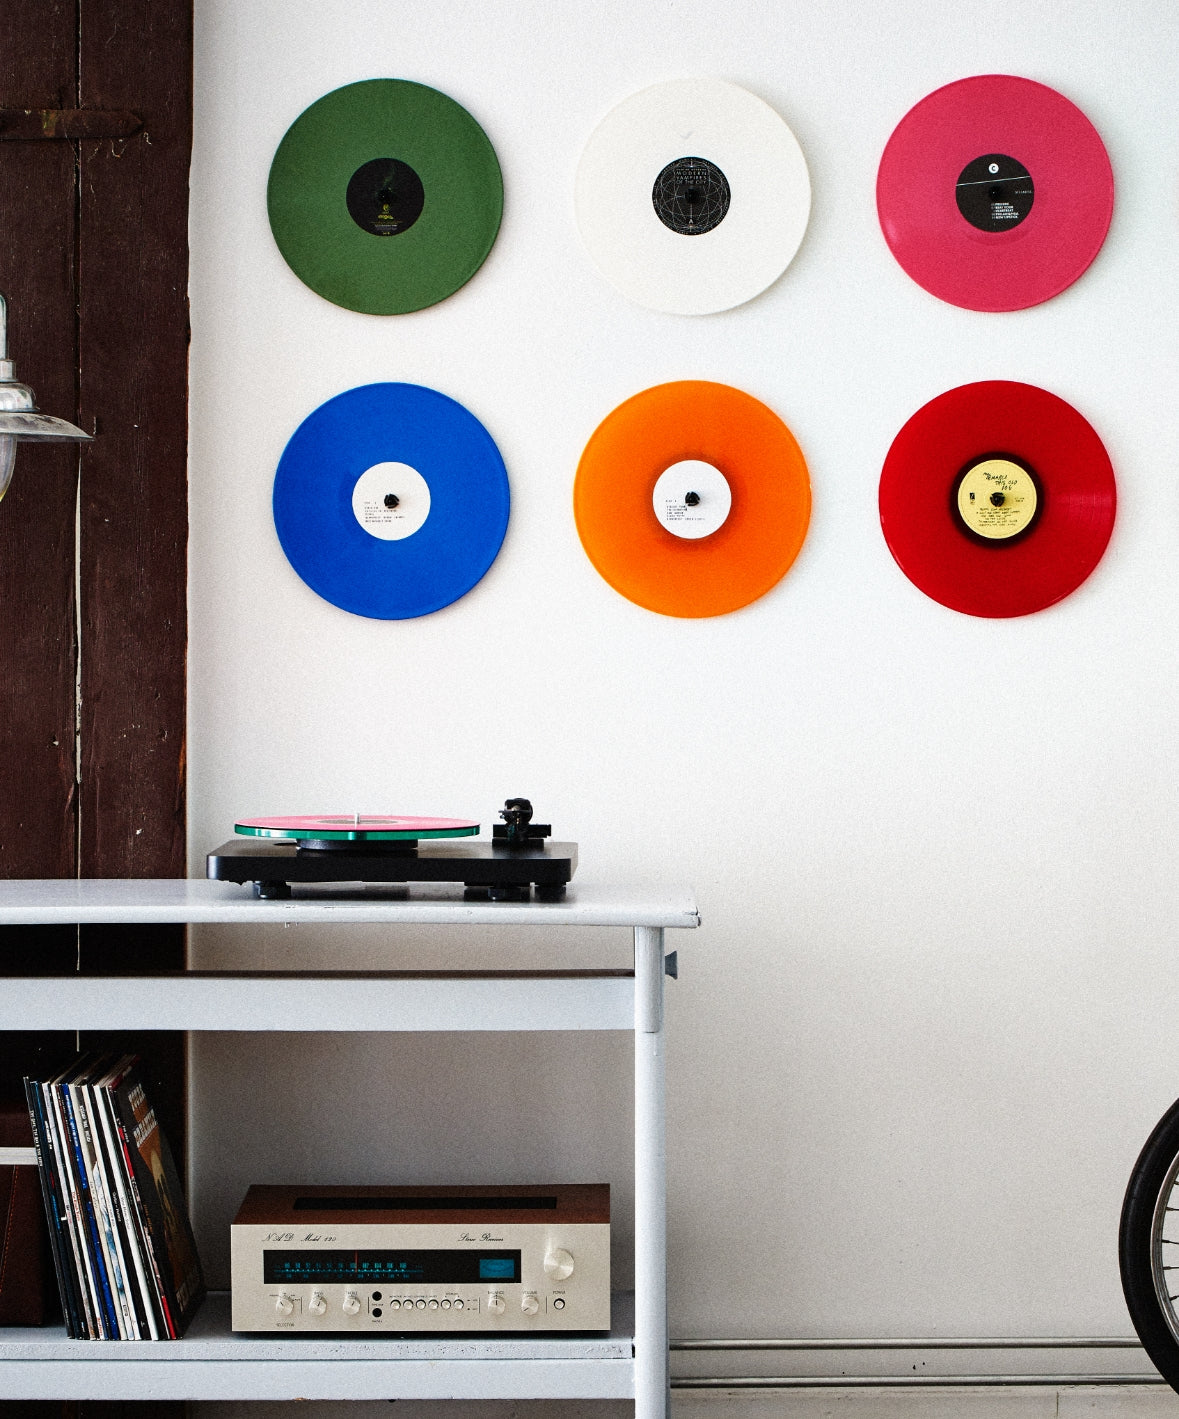 Vinyl records mounted to the wall using the Twelve Inch Adapter, in a minimalist room